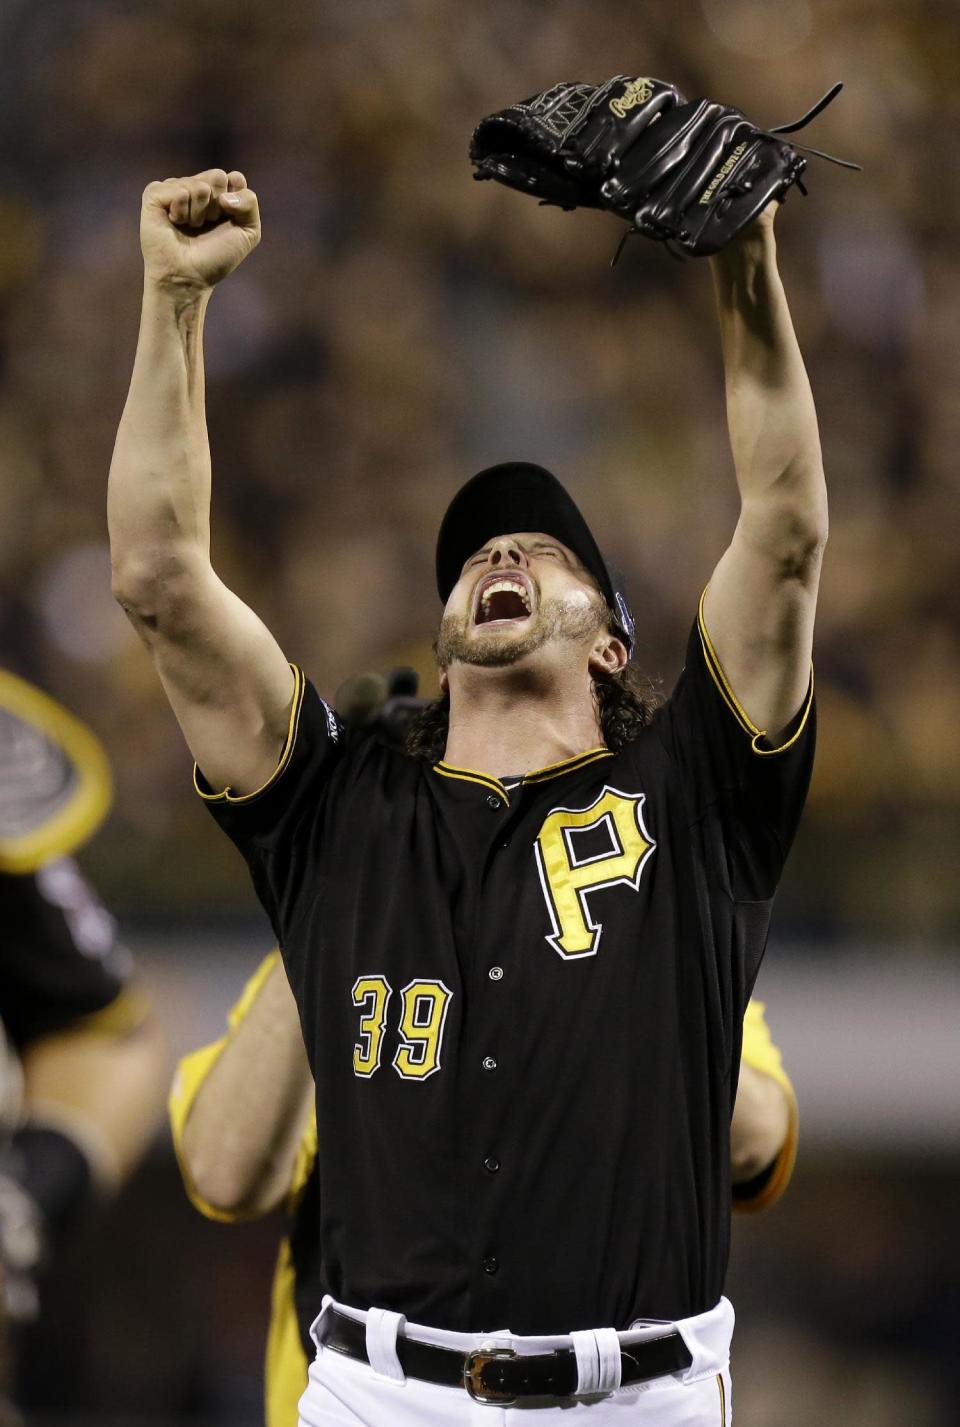 Pittsburgh Pirates relief pitcher Jason Grilli celebrates after getting the last out against the Cincinnati Reds in the NL wild-card playoff baseball game Tuesday, Oct. 1, 2013, in Pittsburgh. The Pirates won 6-2 and advance to the division series. (AP Photo/Gene J. Puskar)